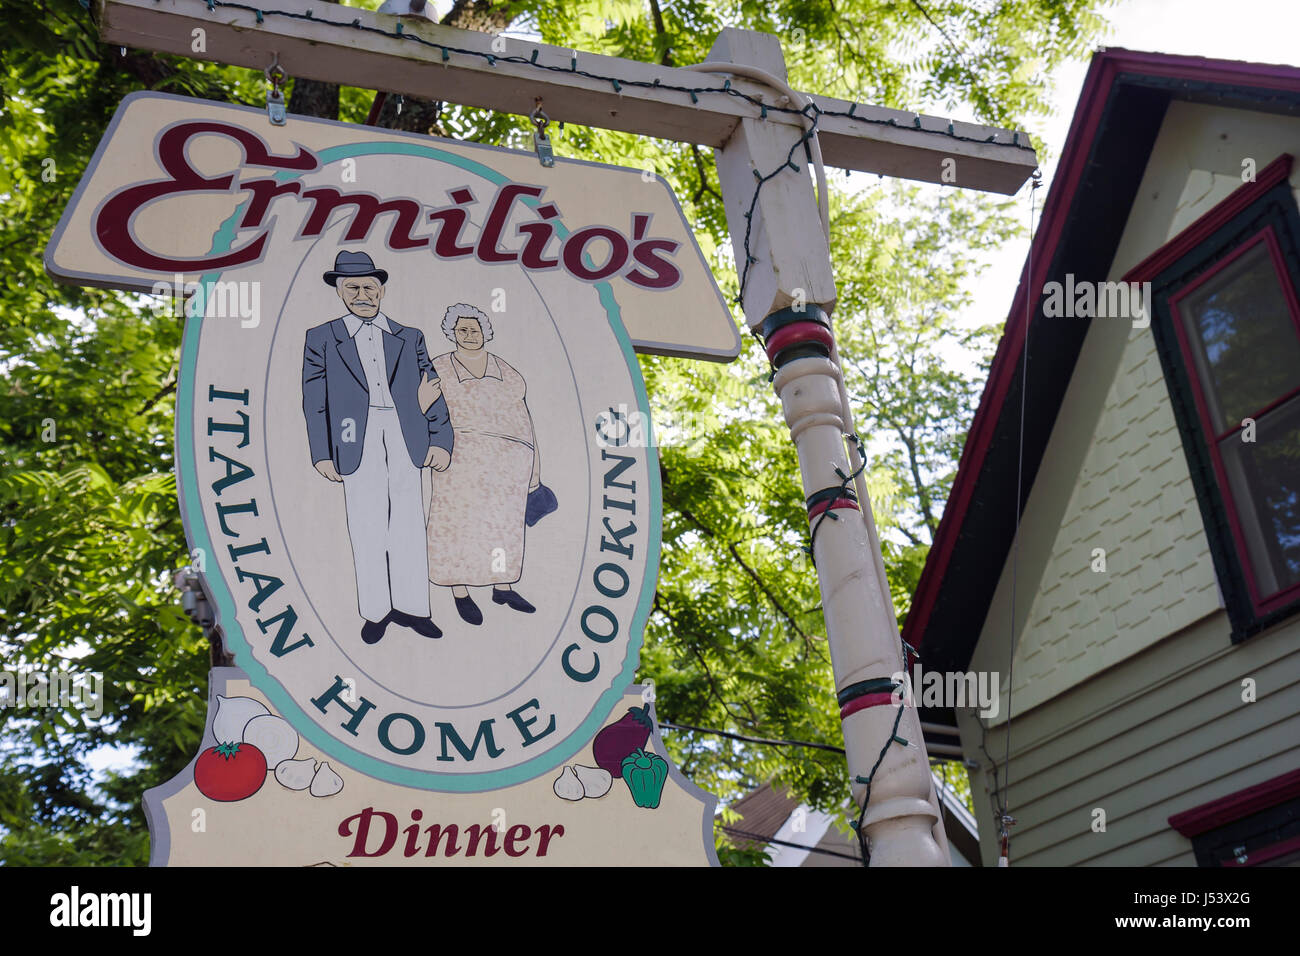 Eureka Springs Arkansas,Ozark Mountains,Ermilio's Italian Home Cooking,sign,restaurant restaurants food dining cafe cafes,dining,food,family families Stock Photo